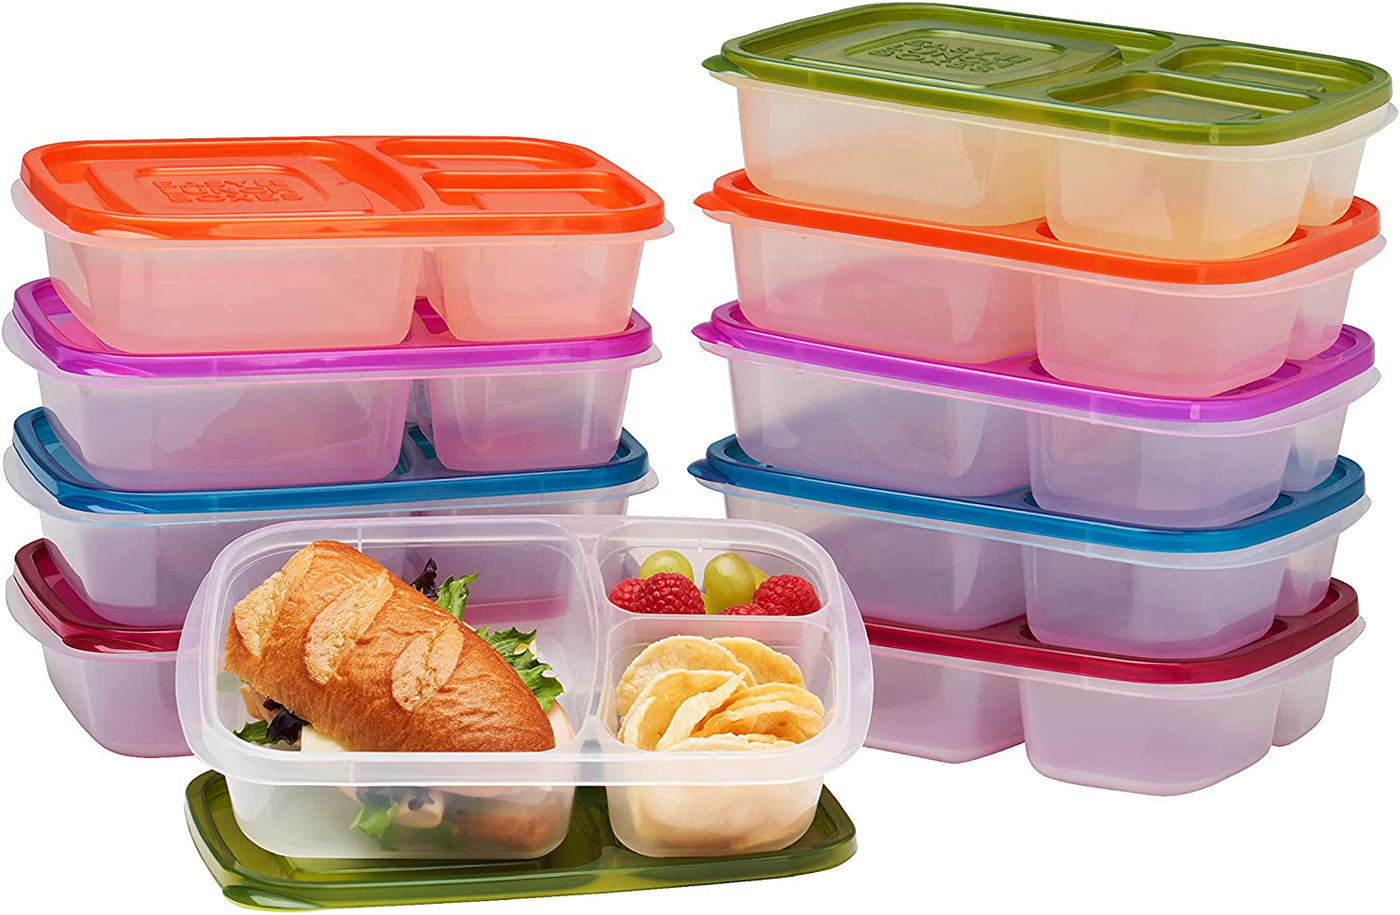 EasyLunchboxes - Bento Lunch Boxes - Reusable 3-Compartment Food Containers for School, Work, and Travel, Set of 10, (Jewel Brights)